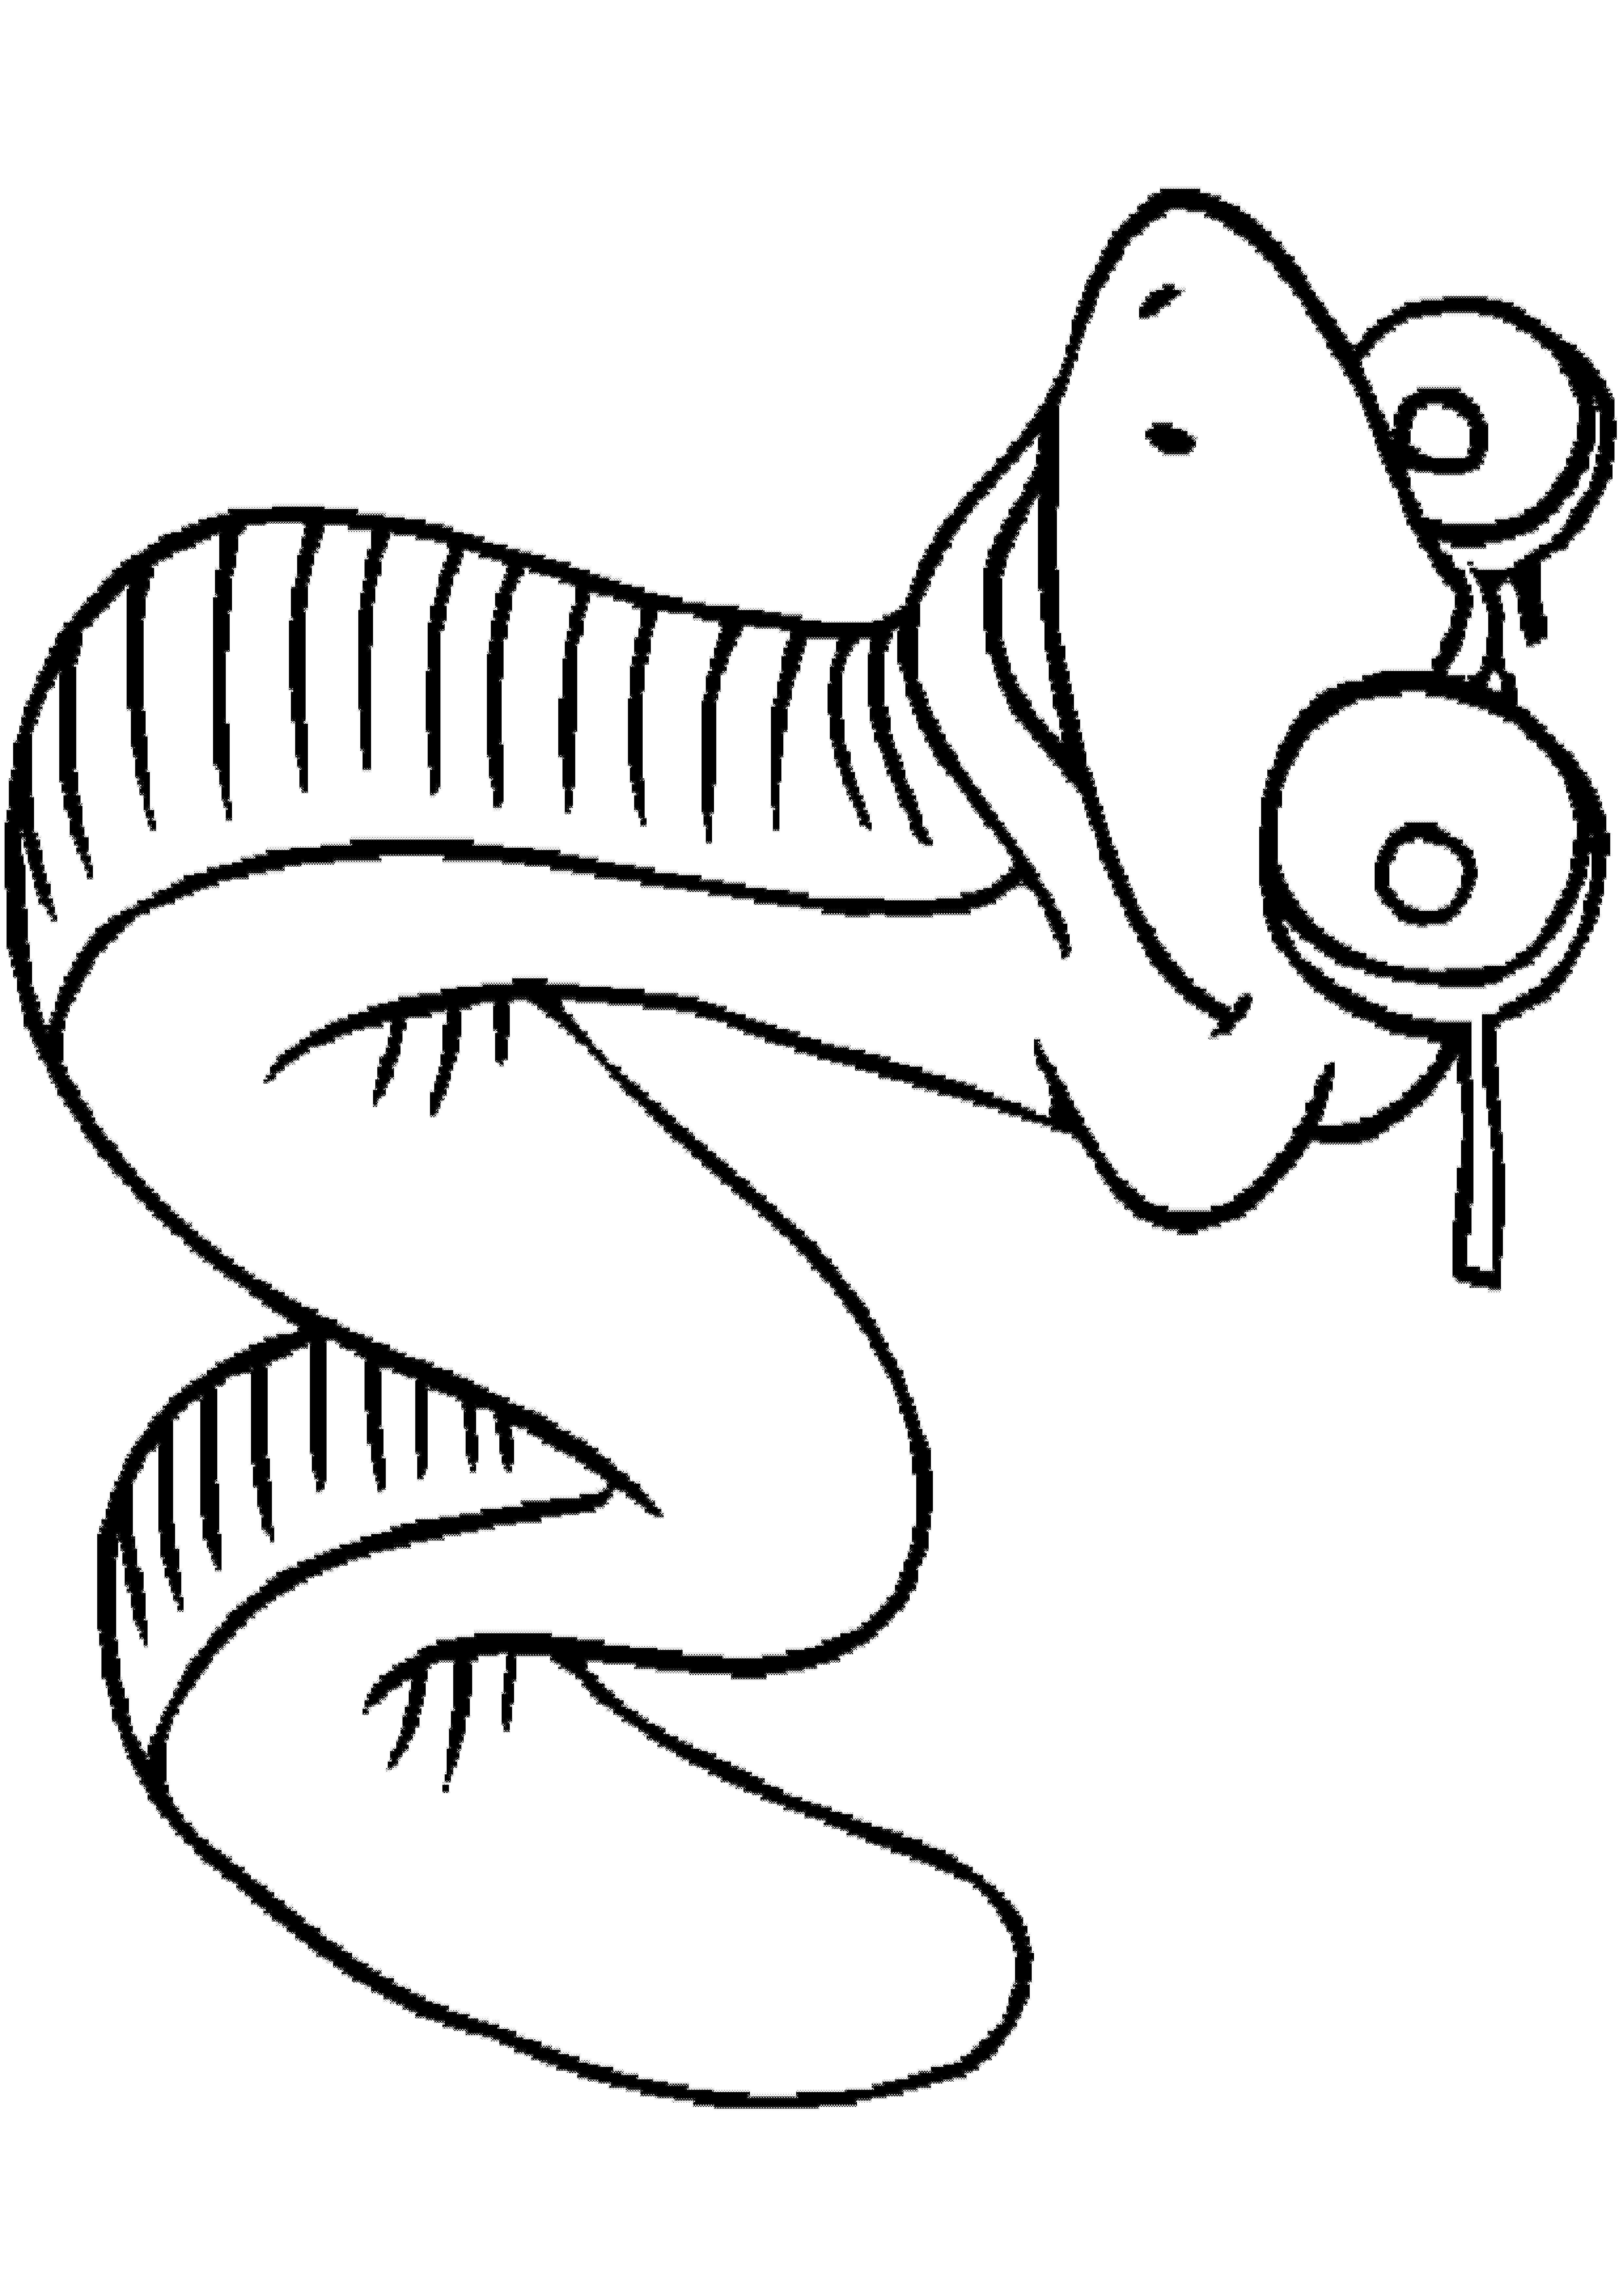 Snake Animal Coloring Pages | Print Colouring Pages - ClipArt Best ...